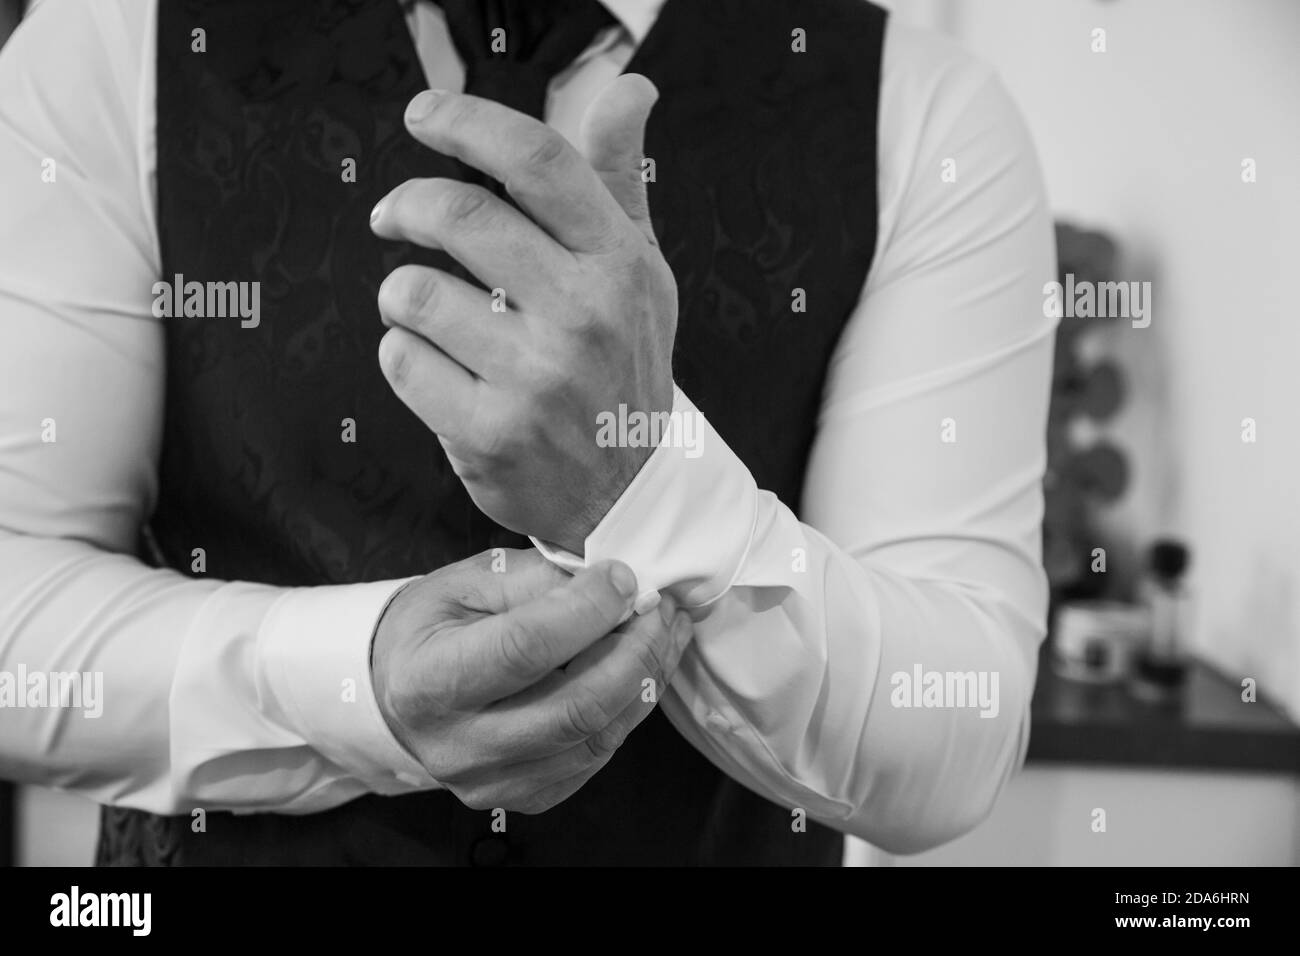 A close up of a groom's hands closing the buttons on his shirt Stock Photo